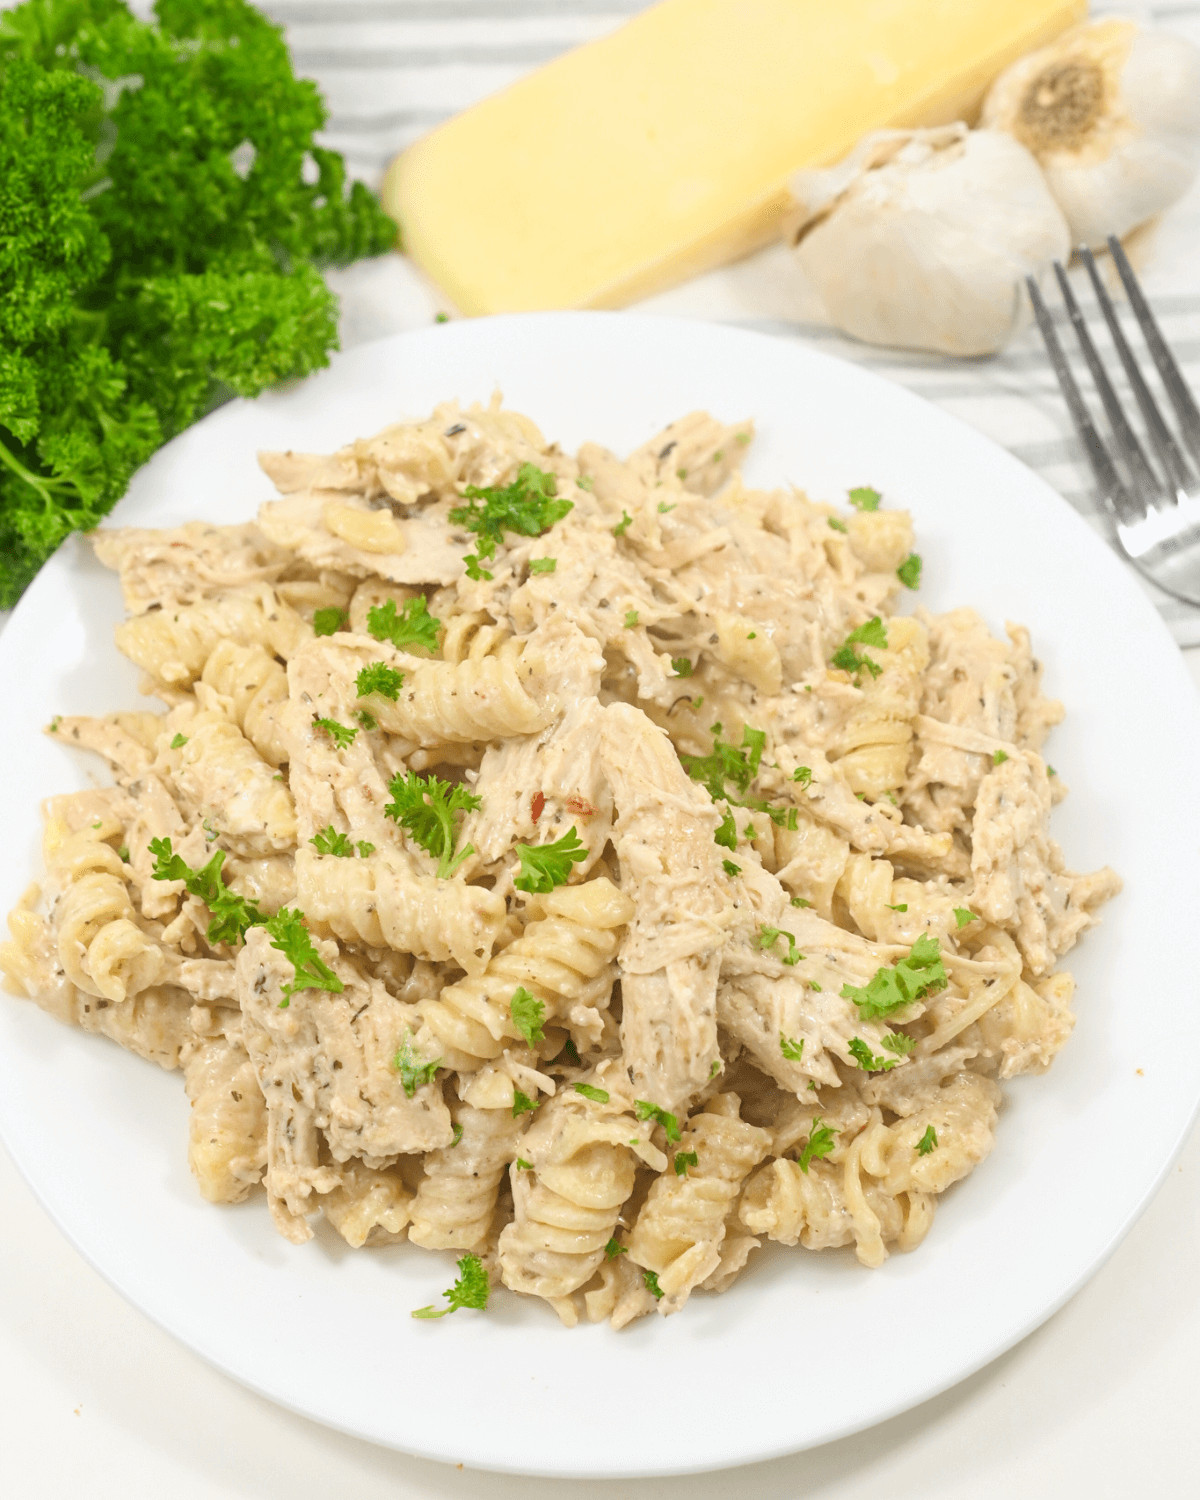 A plate of creamy crock pot garlic parmesan chicken pasta garnished with parsley, accompanied by cheese, garlic, and herbs in the background.